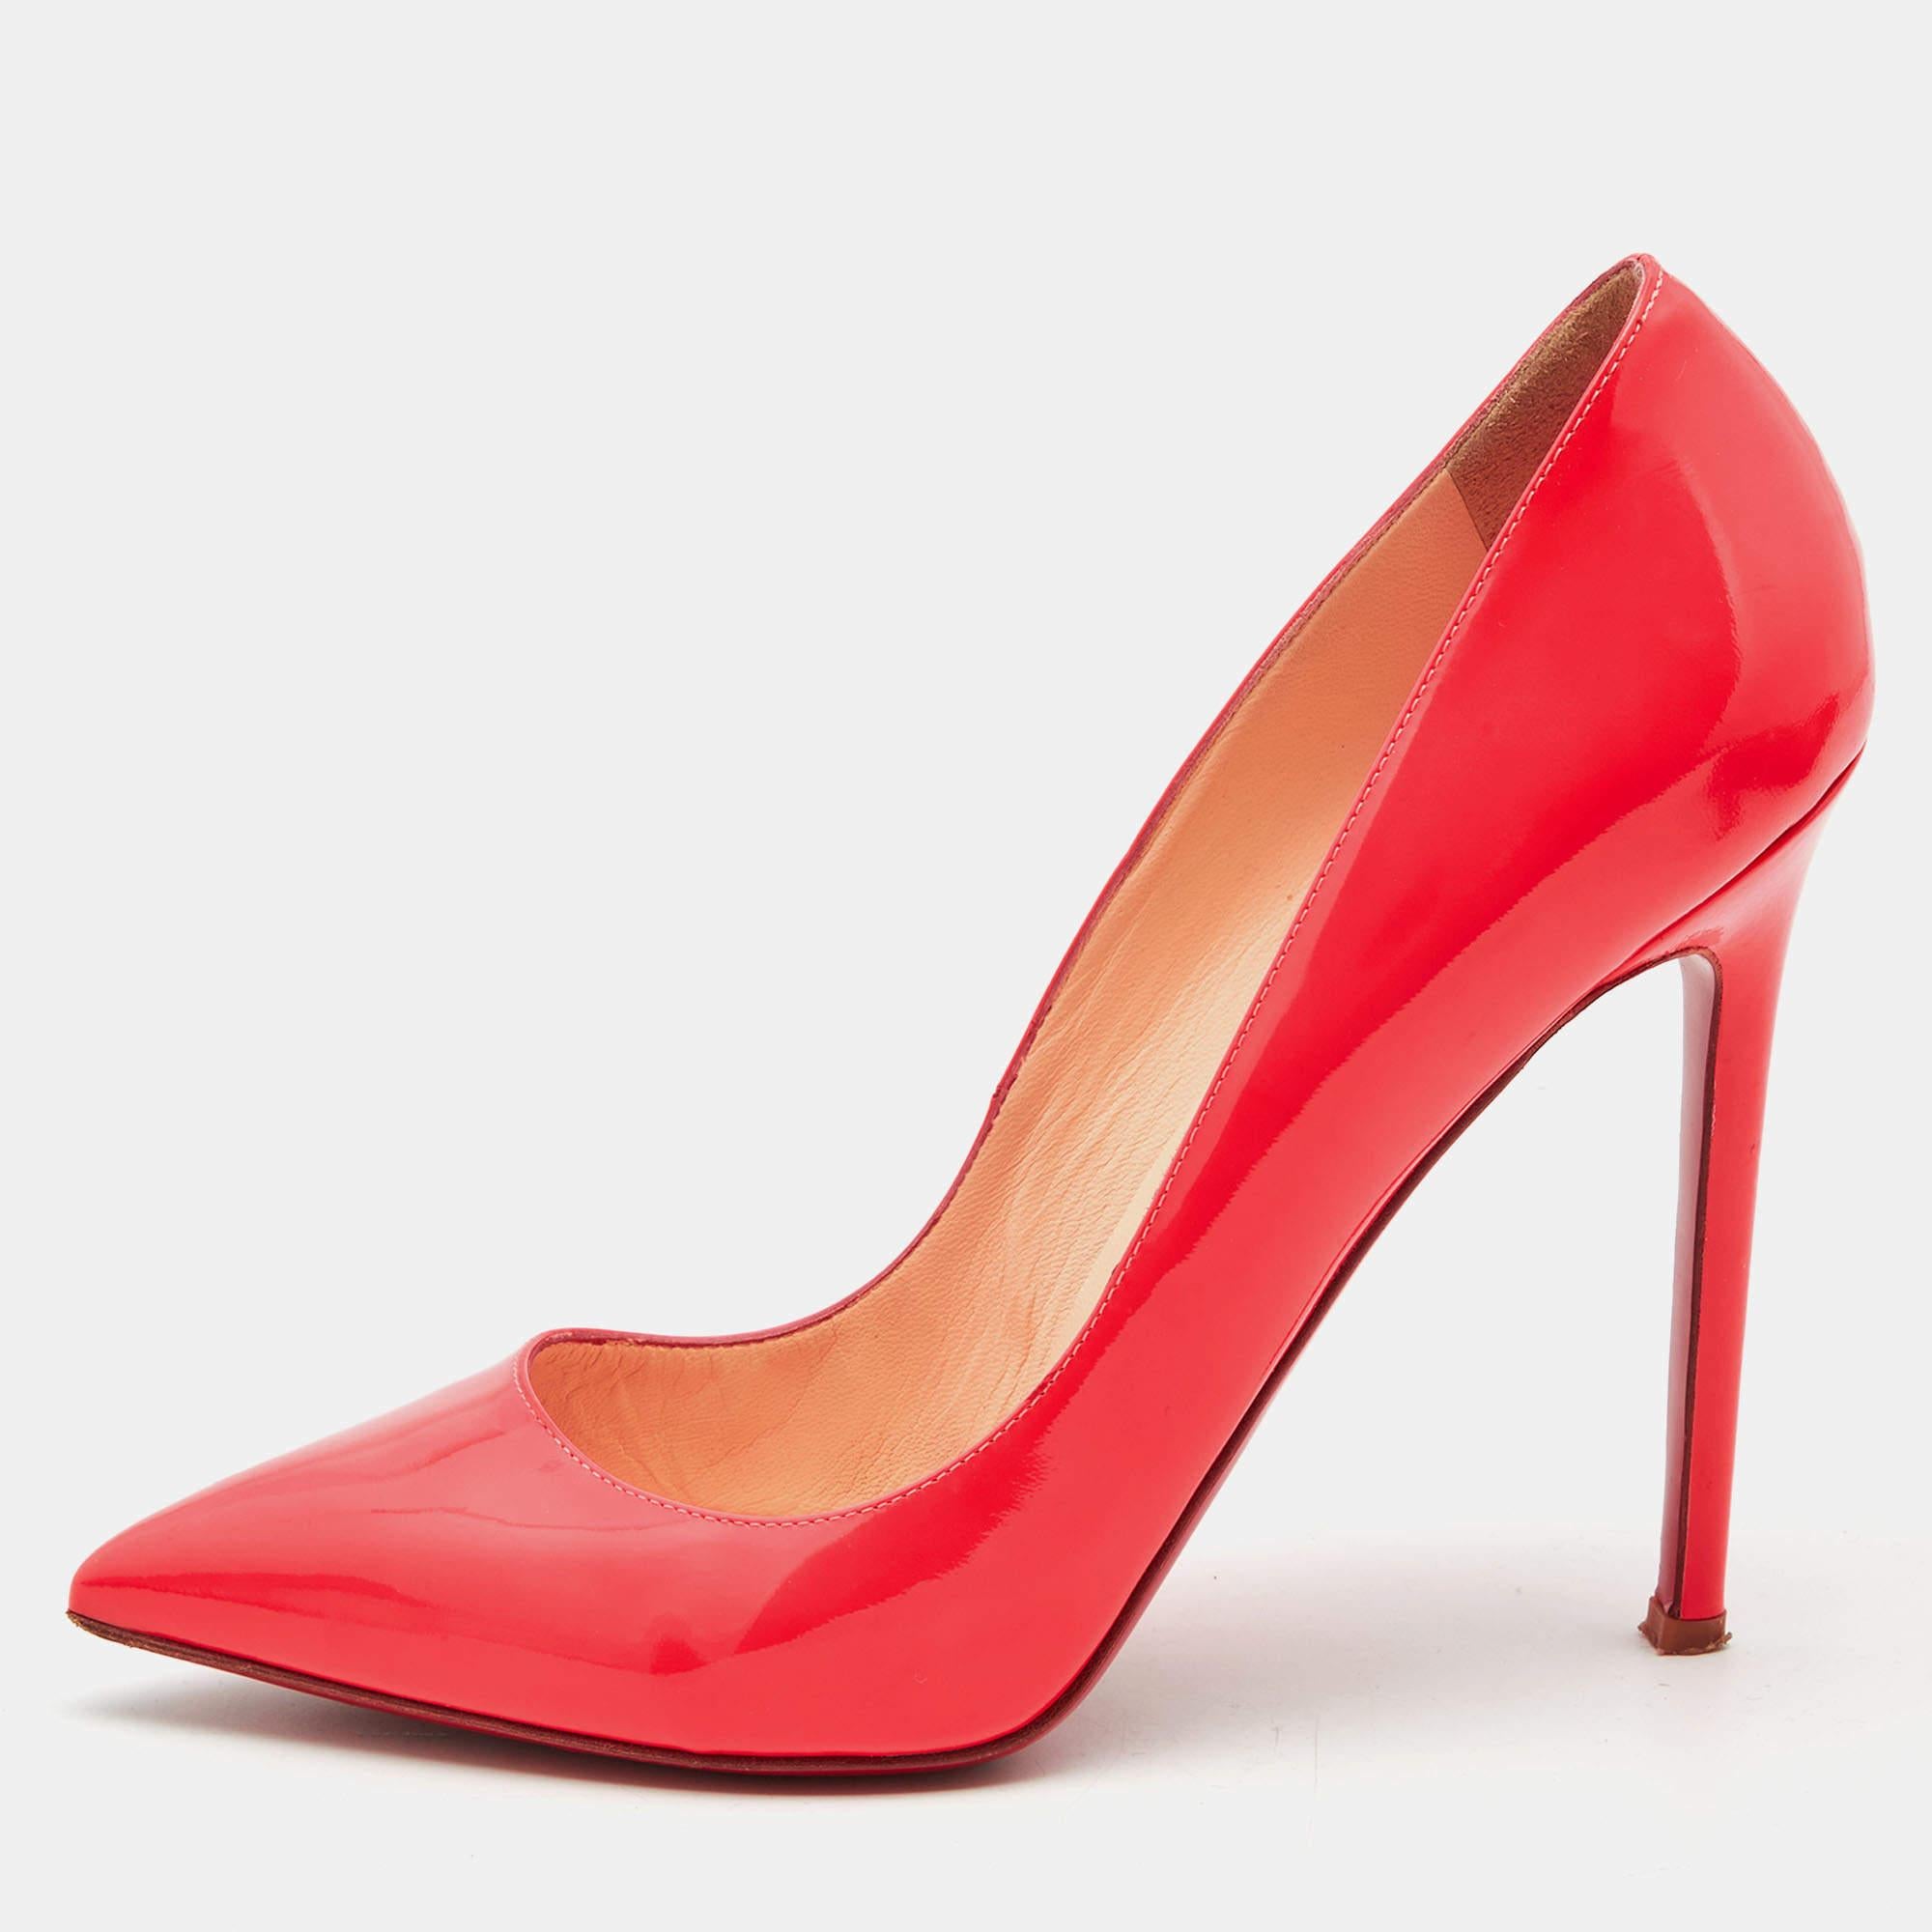 Christian Louboutin Neon Coral Patent So Kate Pointed Toe Pumps Size 40.5 For Sale 1